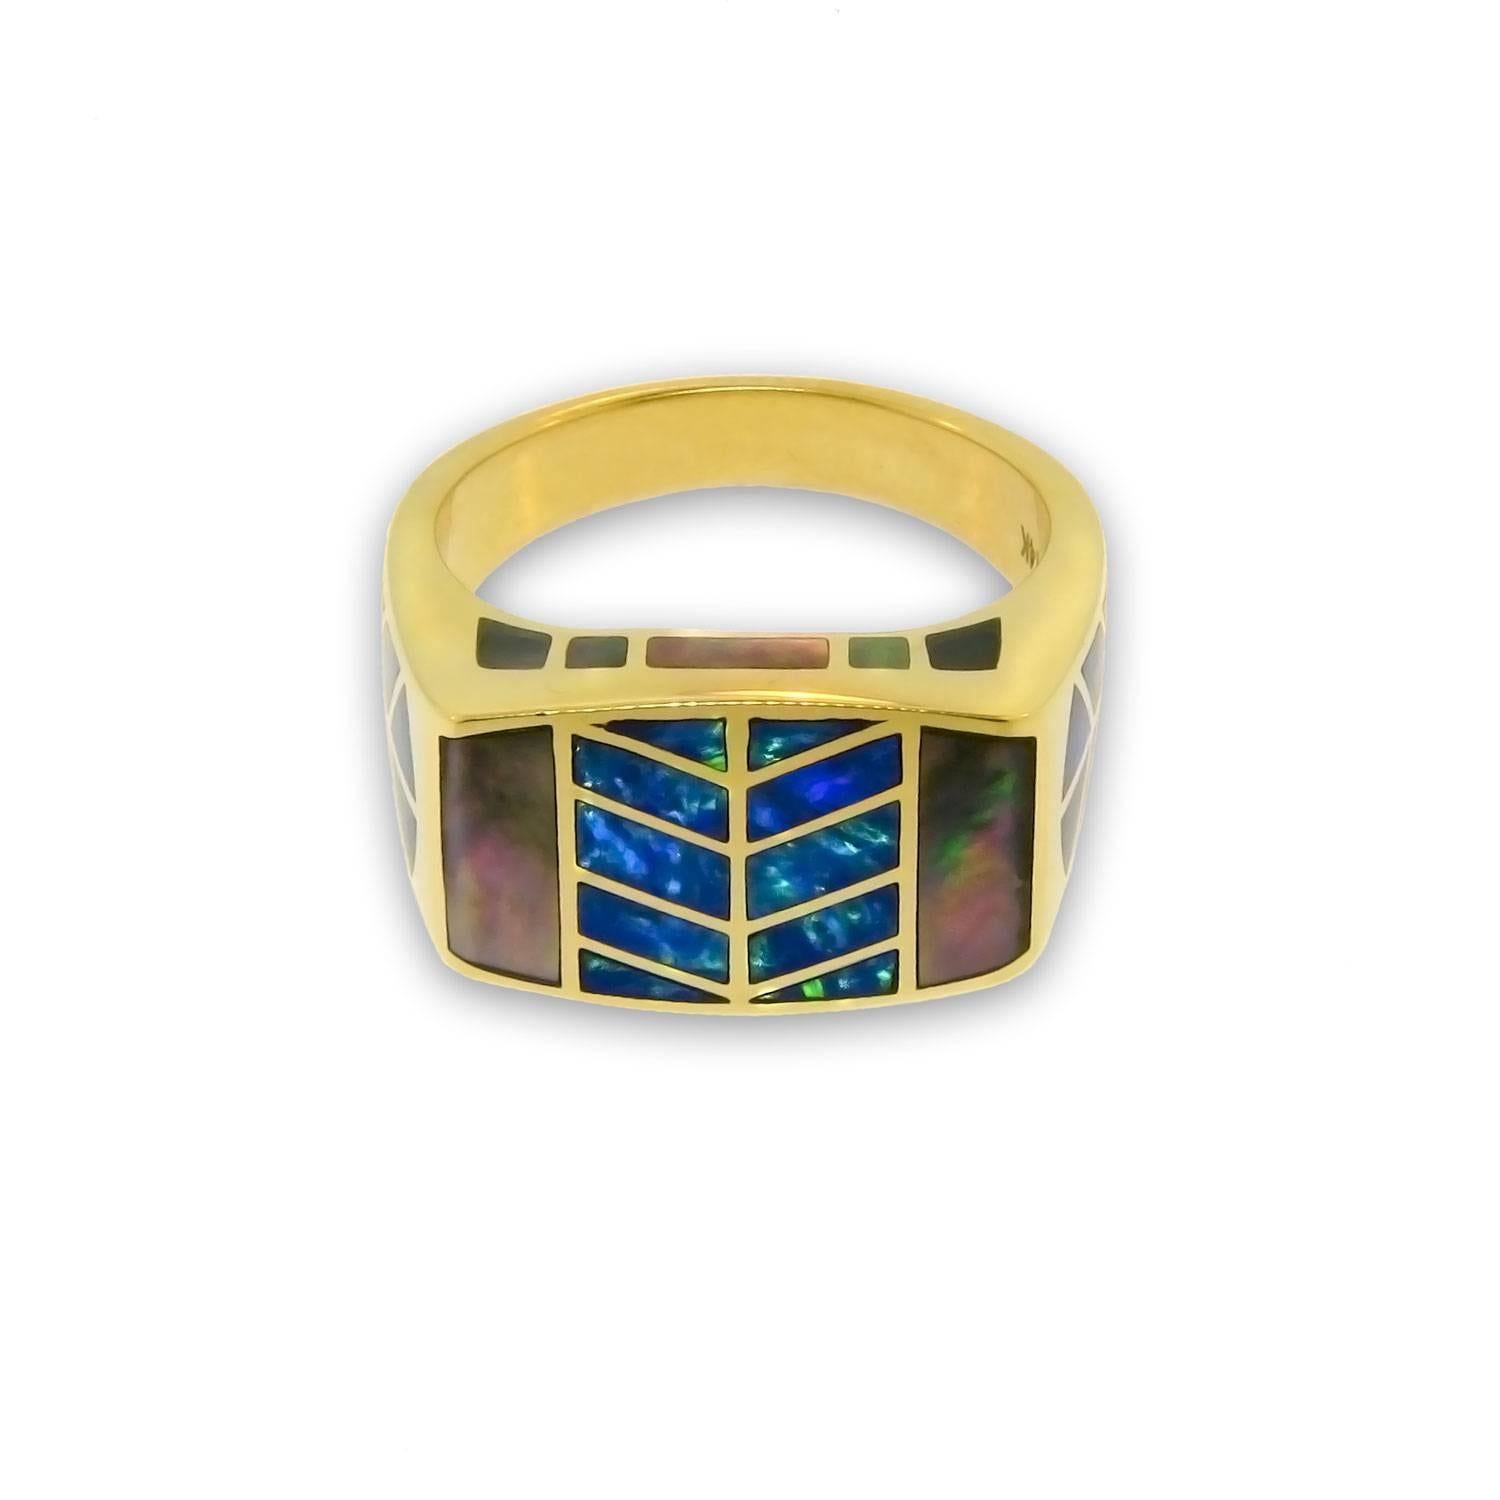 A stunningly unique signet ring by Santa Fe based International Award Winning Designer Jonathan Duran. This 14 karat yellow gold ring features a geometrical rendition of a hawk feather pattern to represent the Element Air.

The hawk feather motif of